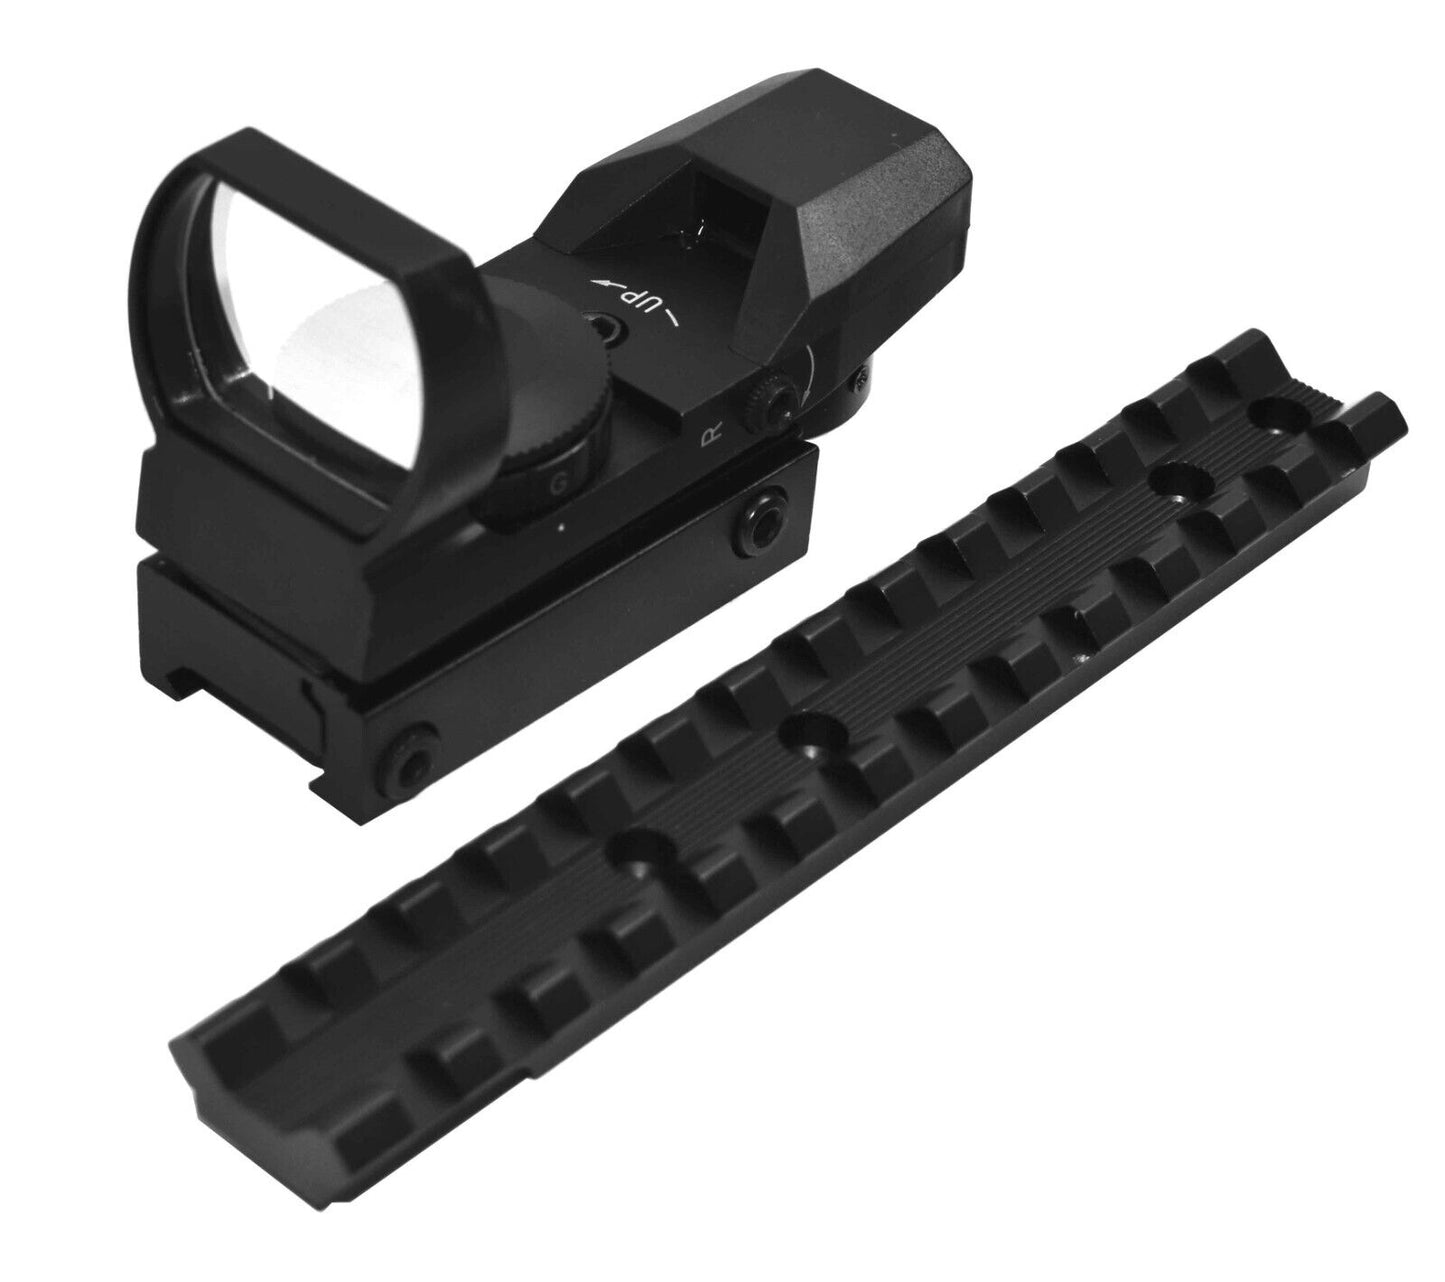 Reflex sight with base mount combo for Winchester 1300 12 gauge pump accessories hunting home defense.